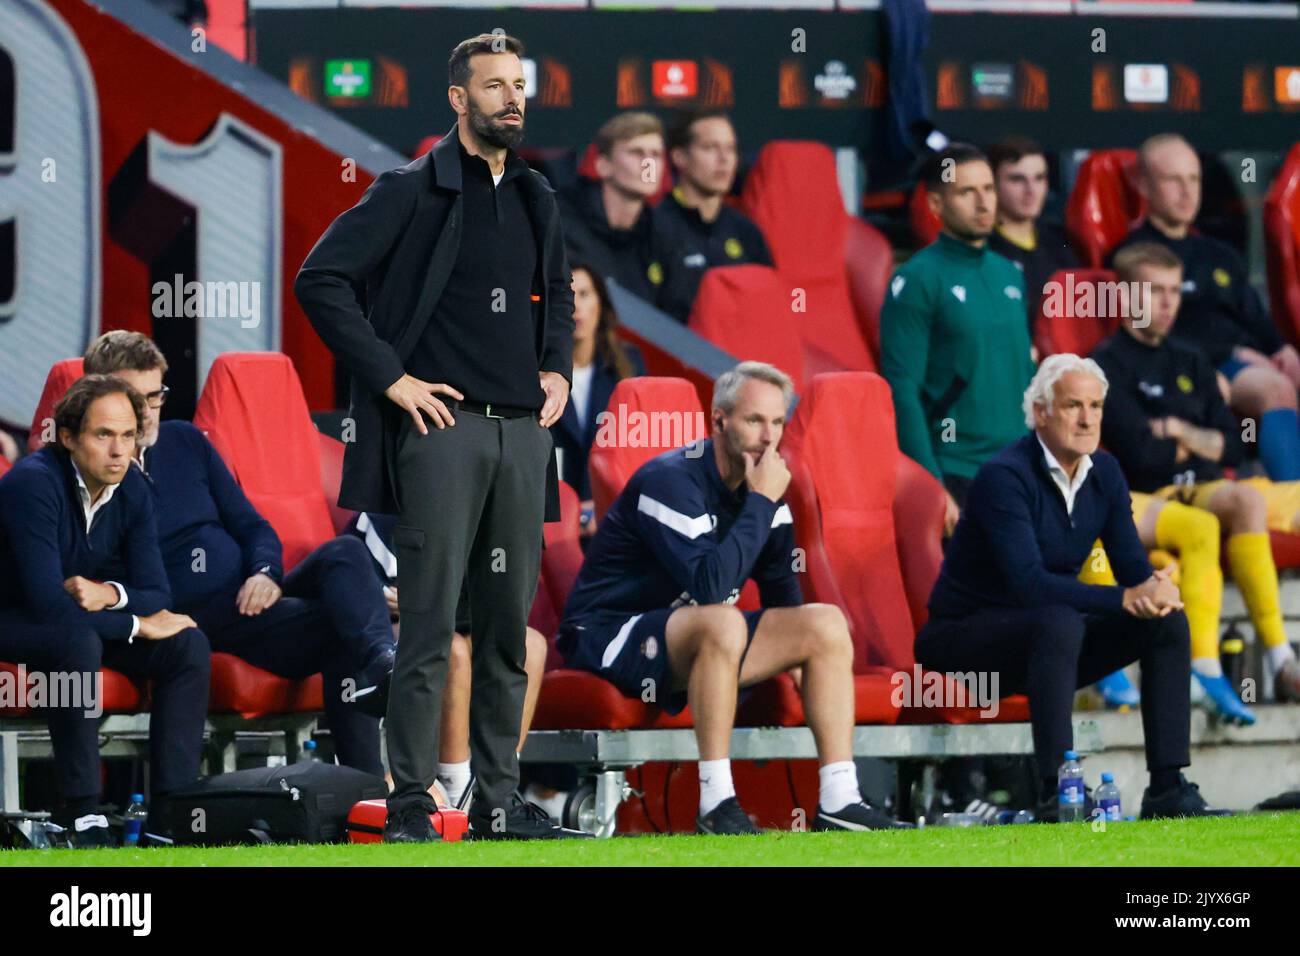 EINDHOVEN, NETHERLANDS - SEPTEMBER 8: trainer/coach Ruud van Nistelrooy of PSV Eindhoven during the Group A - UEFA Europa League match between PSV and Bodo/Glimt at Philips stadium on September 8, 2022 in Eindhoven, Netherlands (Photo by Broer van den Boom/Orange Pictures) Stock Photo